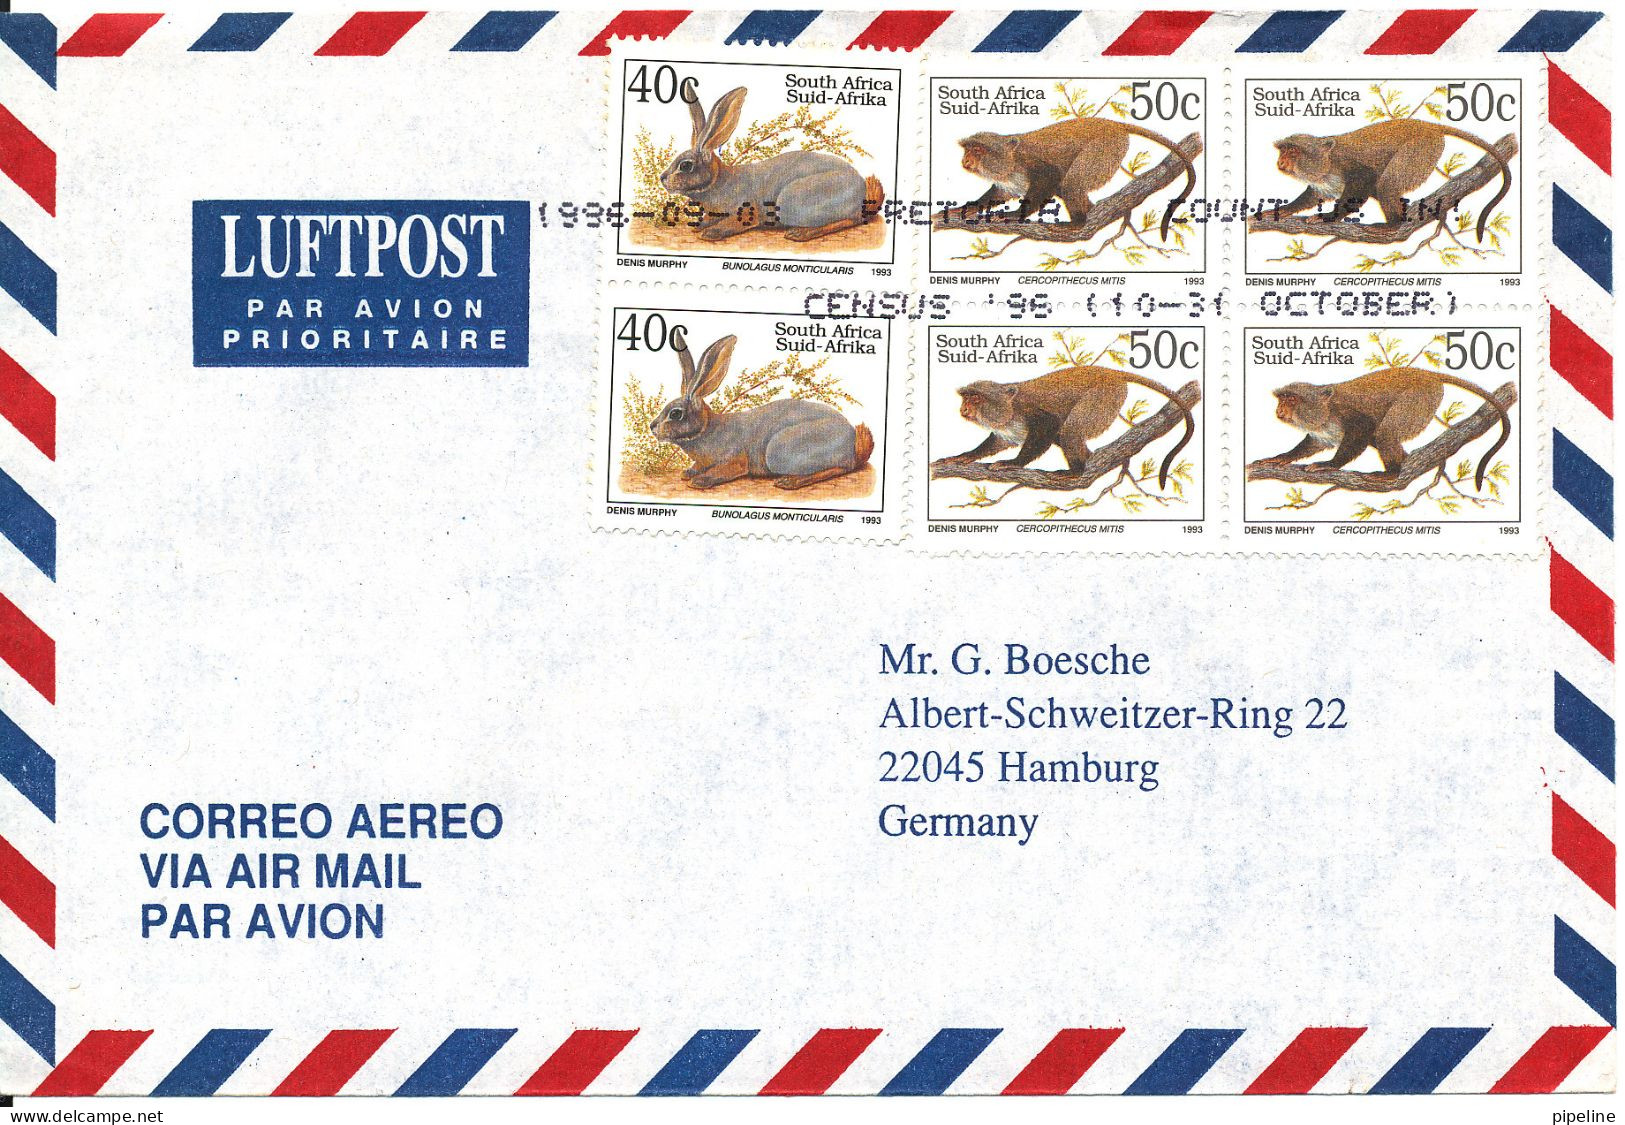 South Africa Air Mail Cover Sent To Germany 3-10-1996 - Luftpost